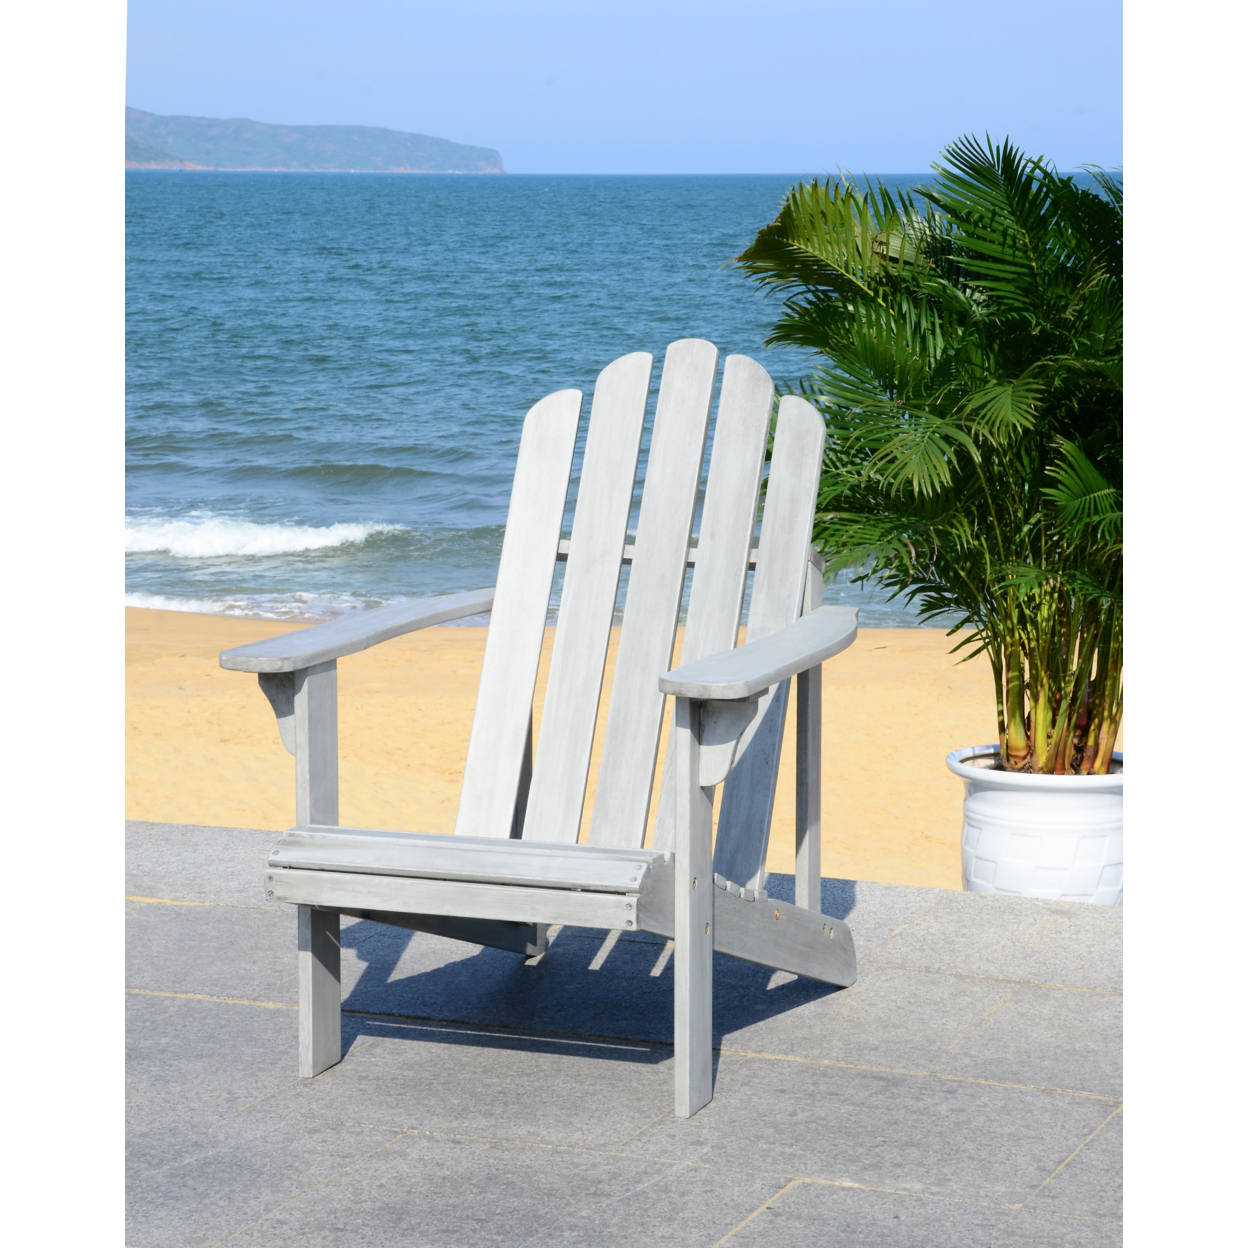 SAFAVIEH Outdoor Collection Topher Adirondack Chair Grey Wash